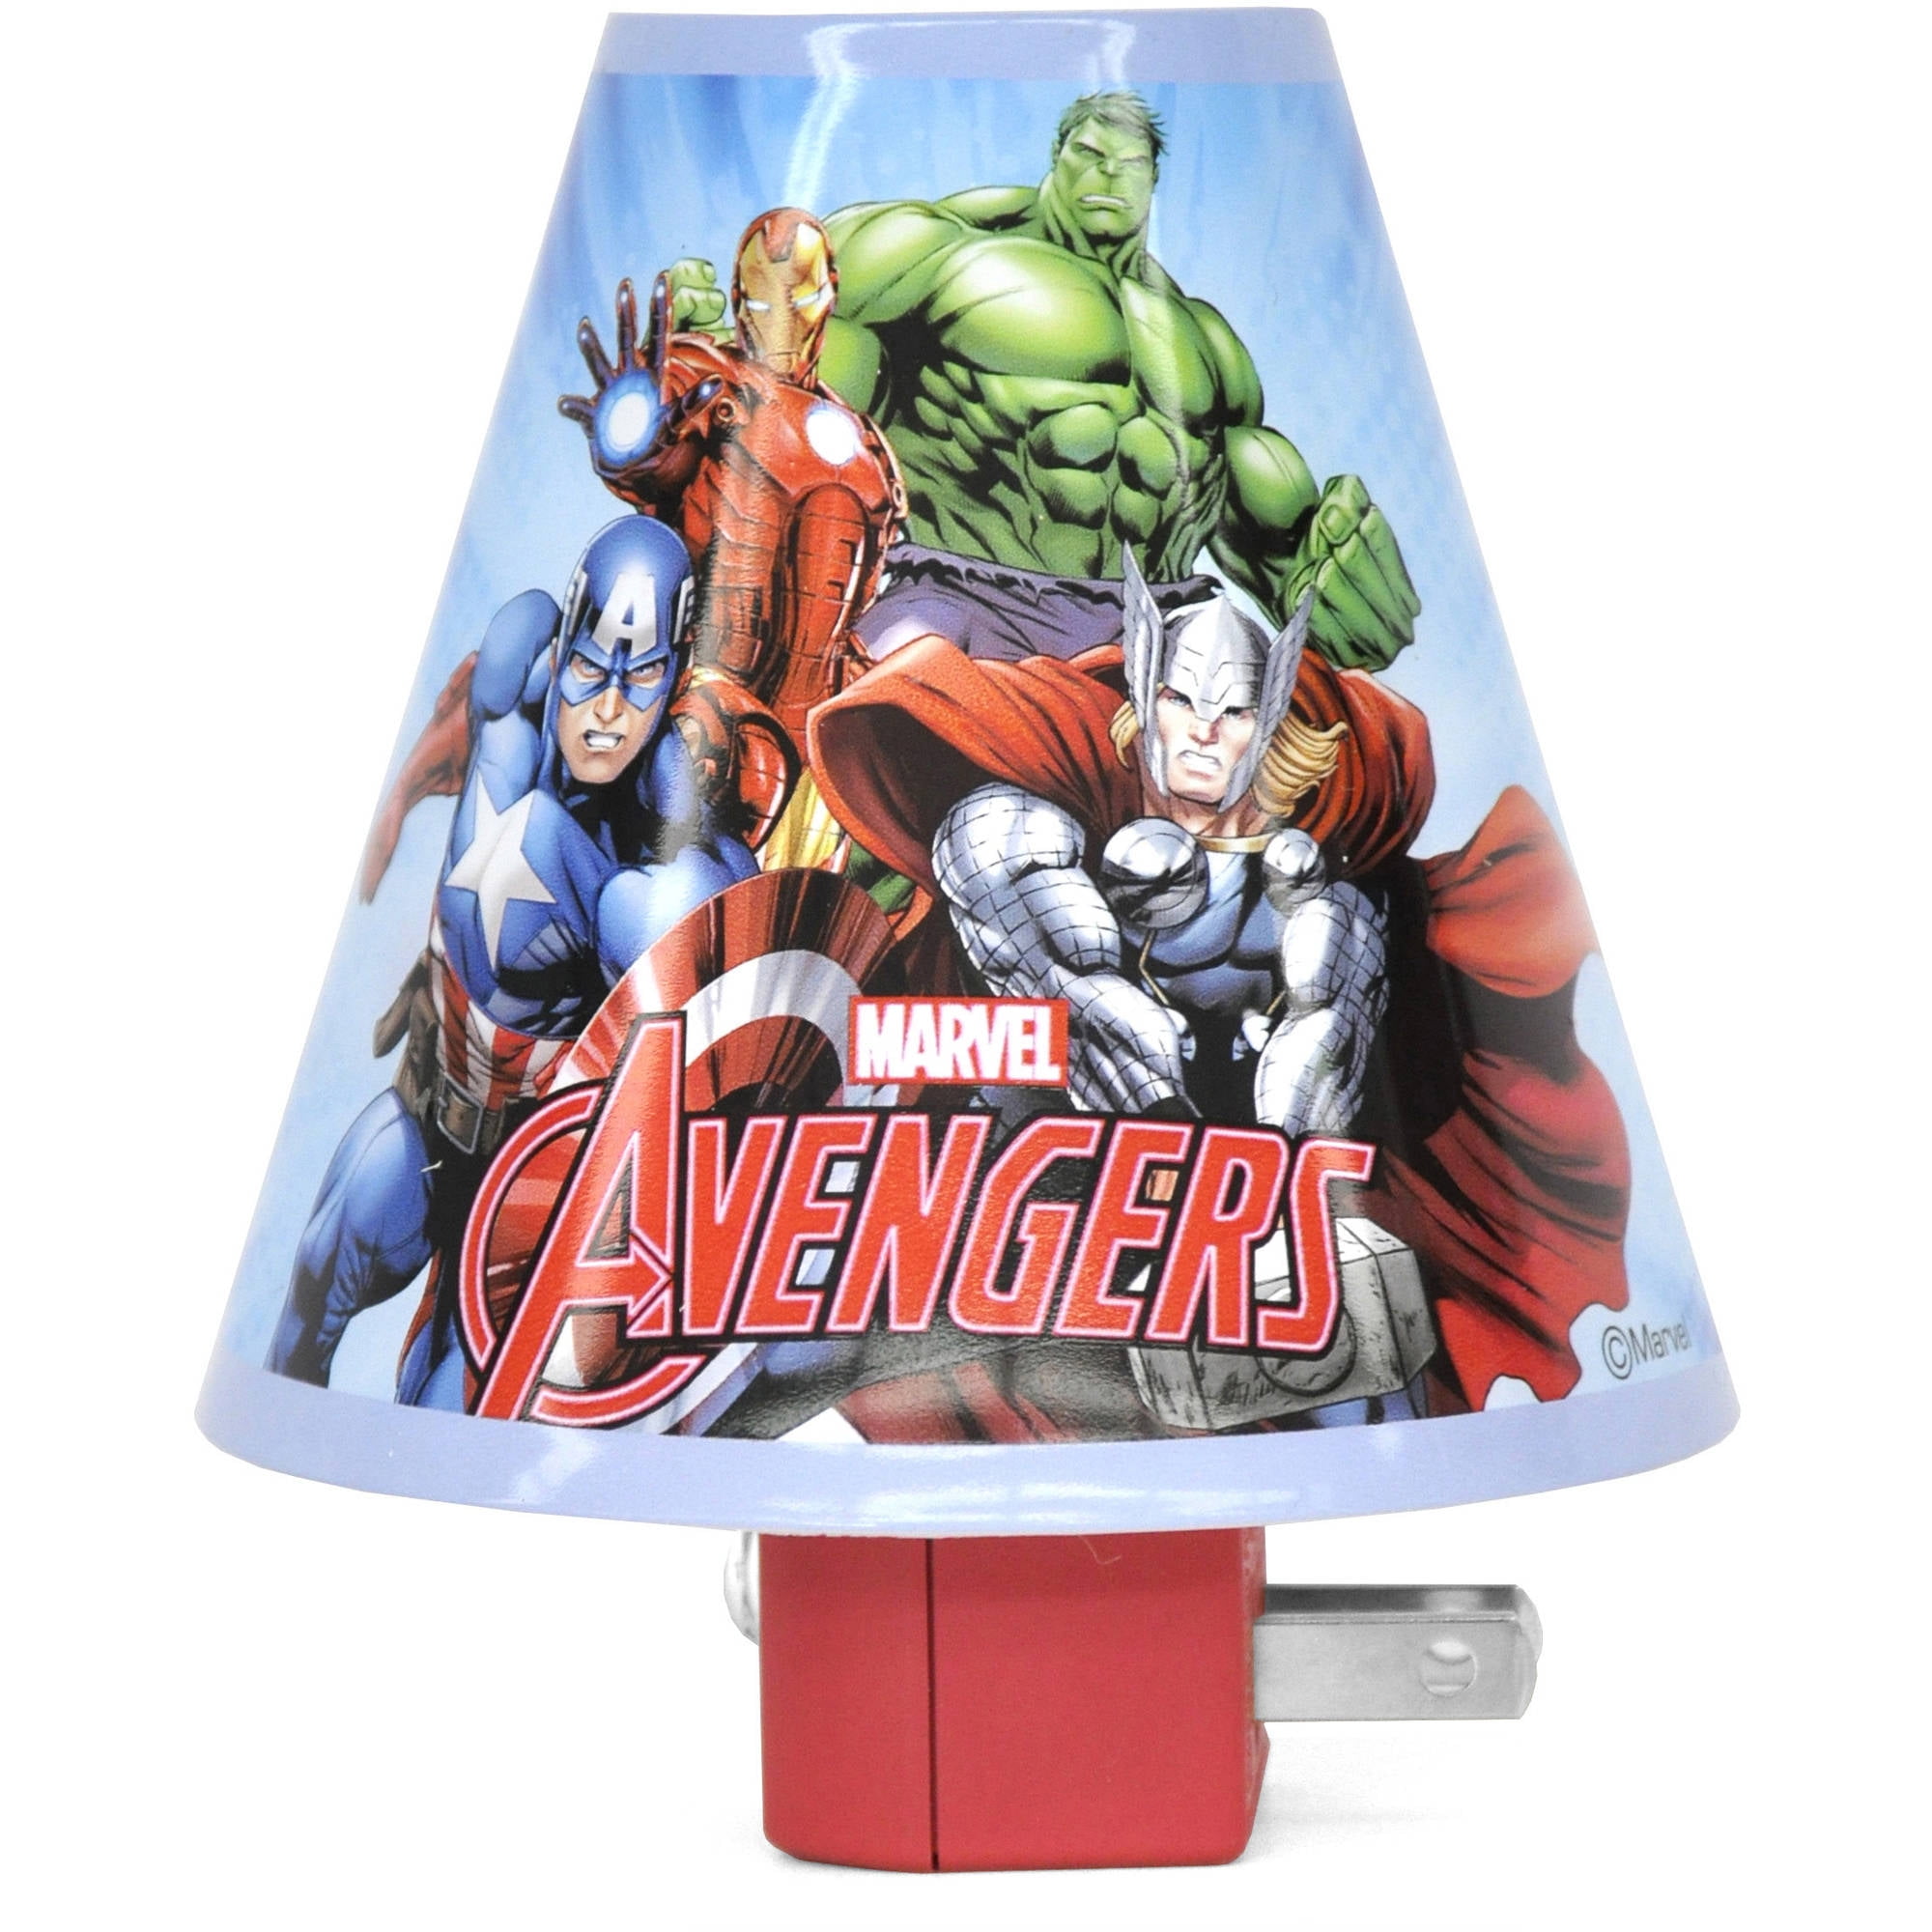 Avengers Personalized Marvel Avengers LED Night Light Lamp with Remote Control 